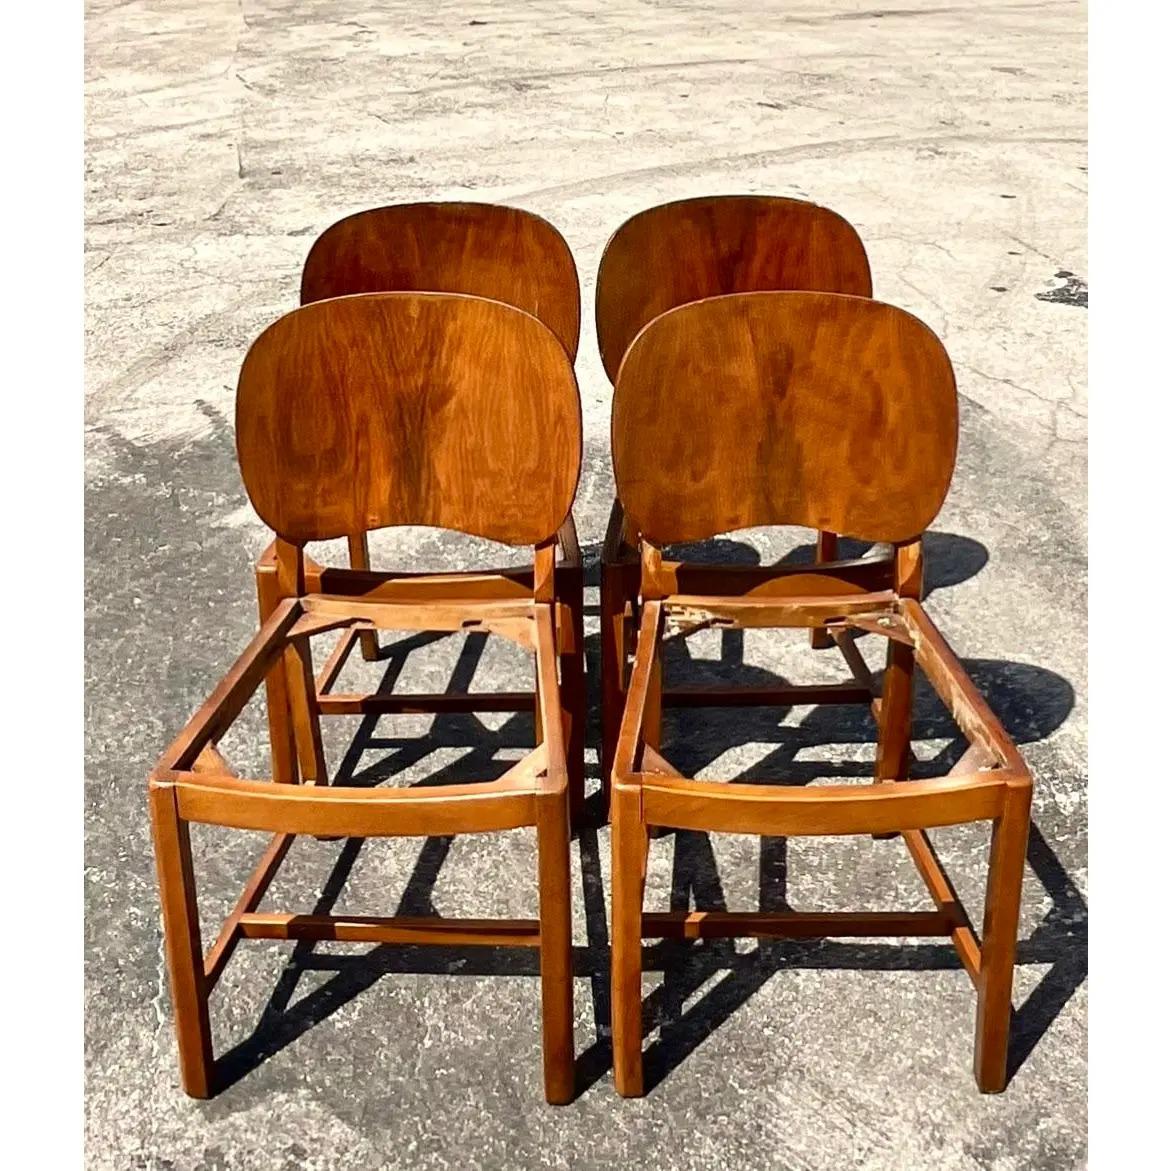 20th Century Vintage Deco Burl Wood Paddle Back Dining Chairs, Set of Four